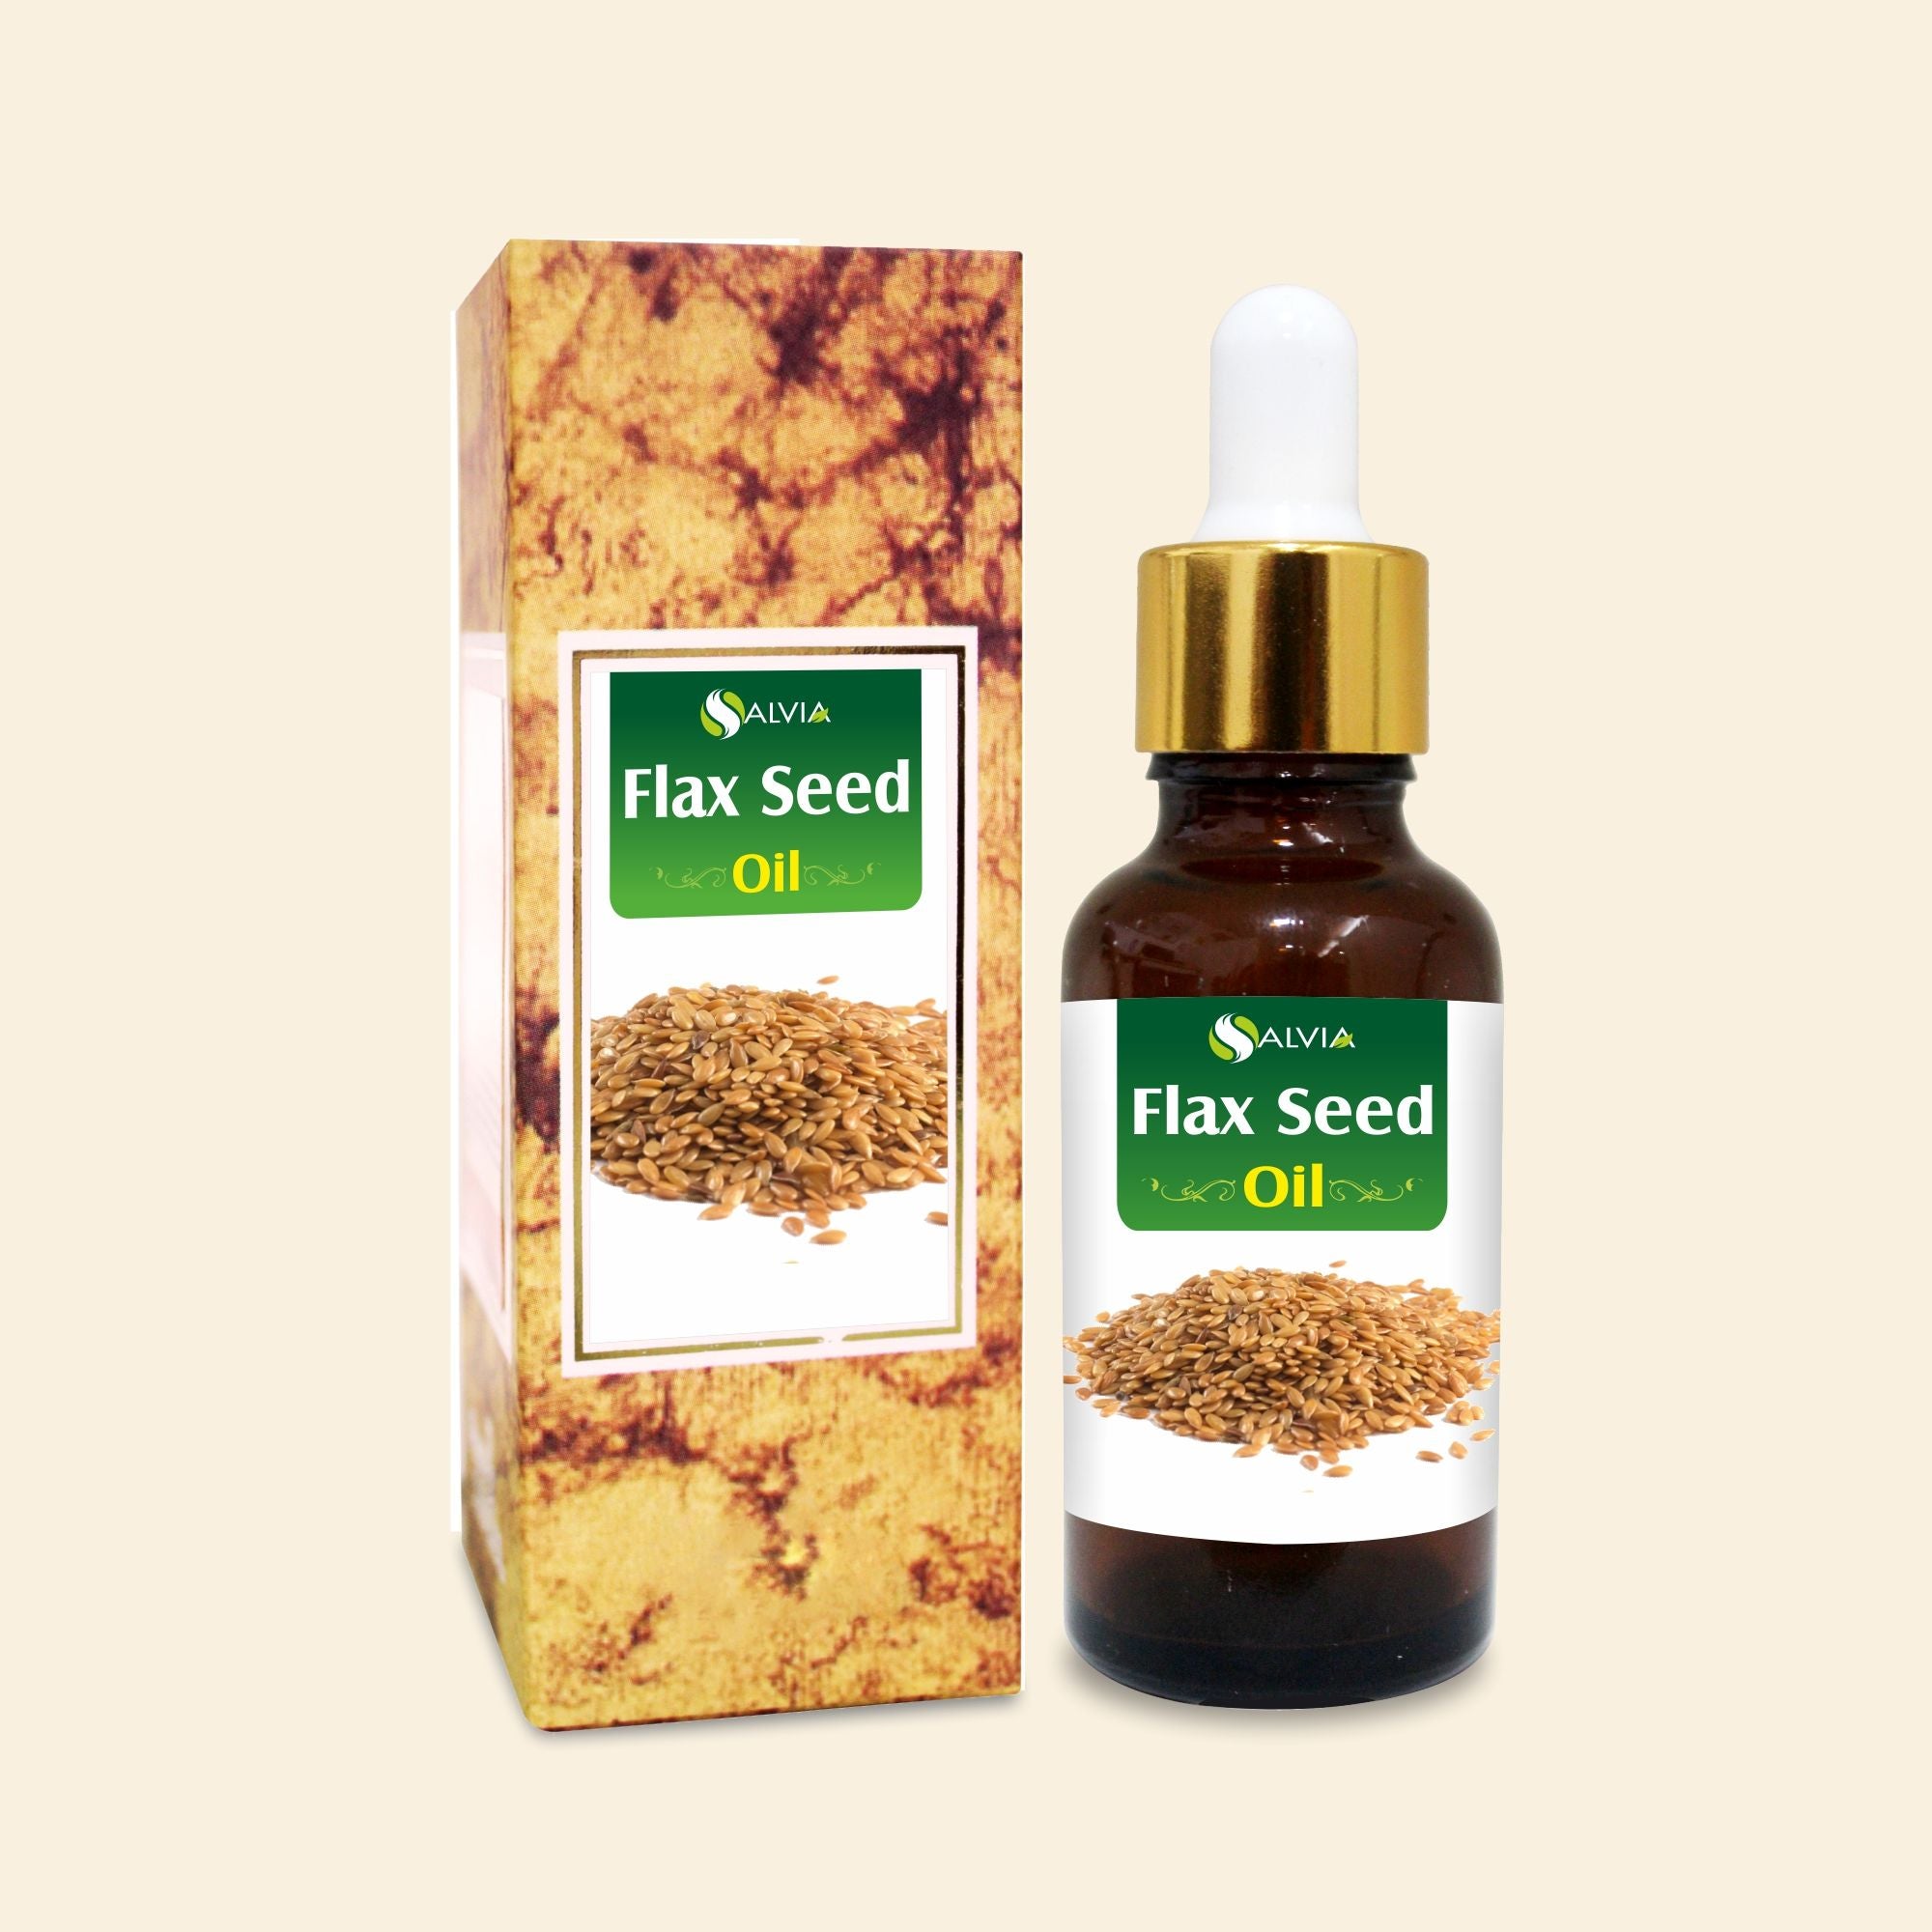 Salvia Natural Carrier Oils Flax Seed Oil (Linum Usitatissimum) Pure & Natural Carrier Oil